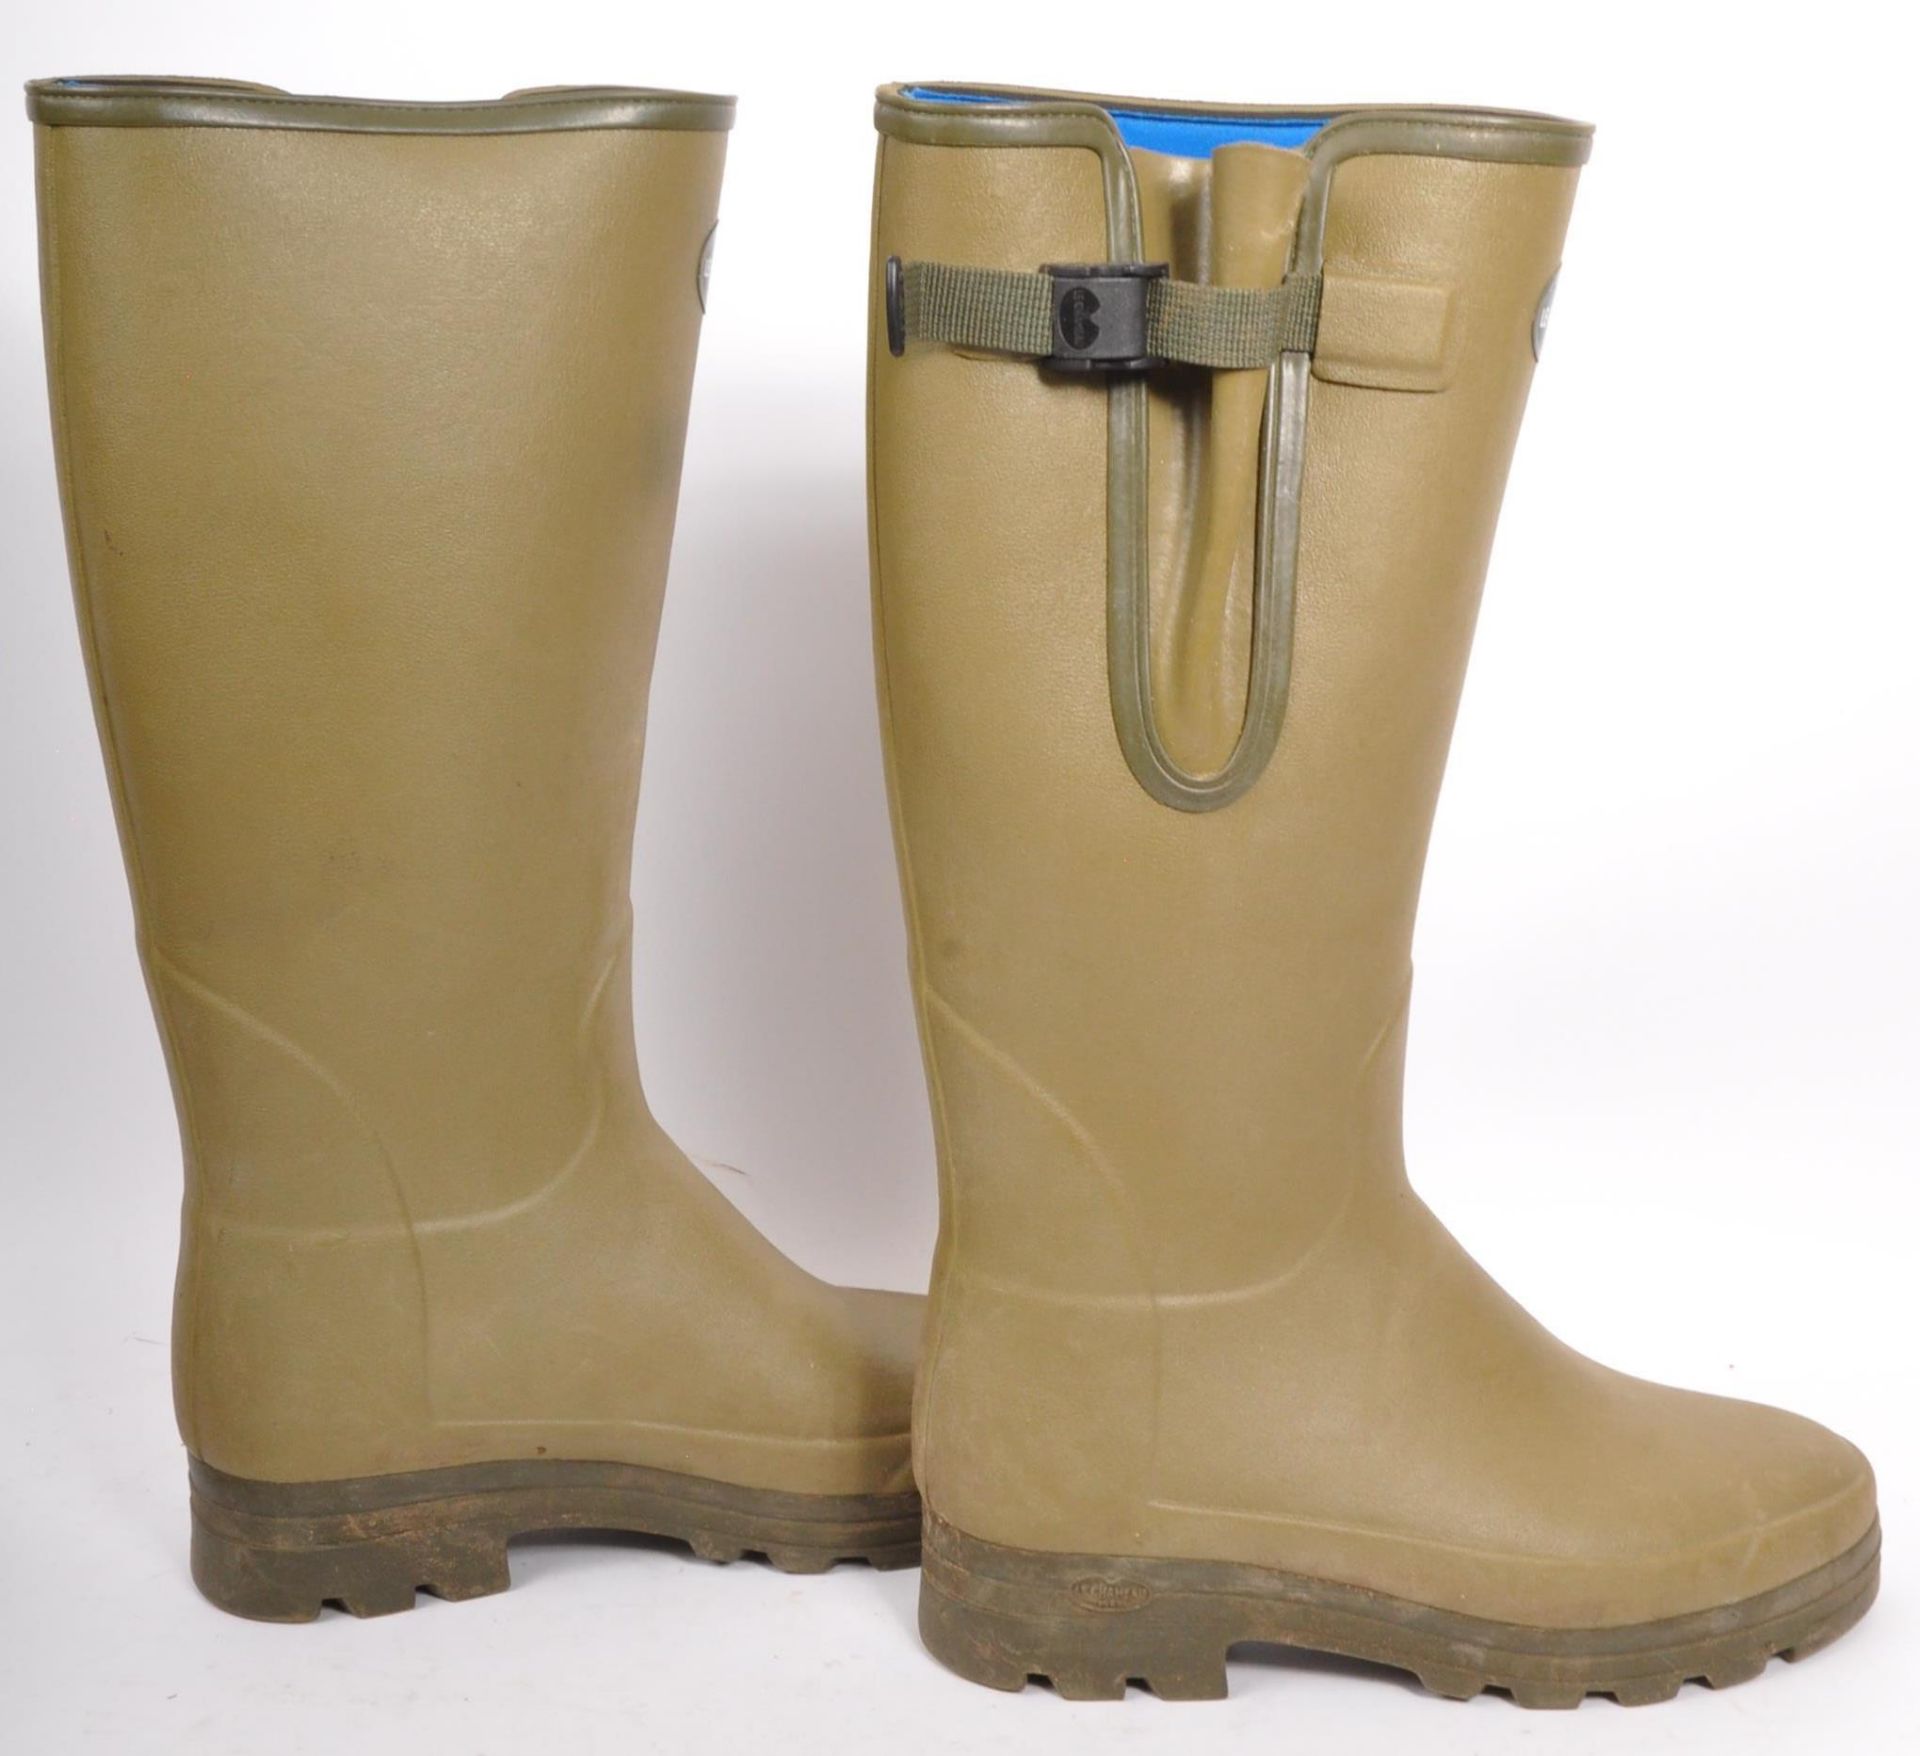 PAIR OF LE CHAMEAU GREEN WELLINGTON BOOTS - Image 5 of 5